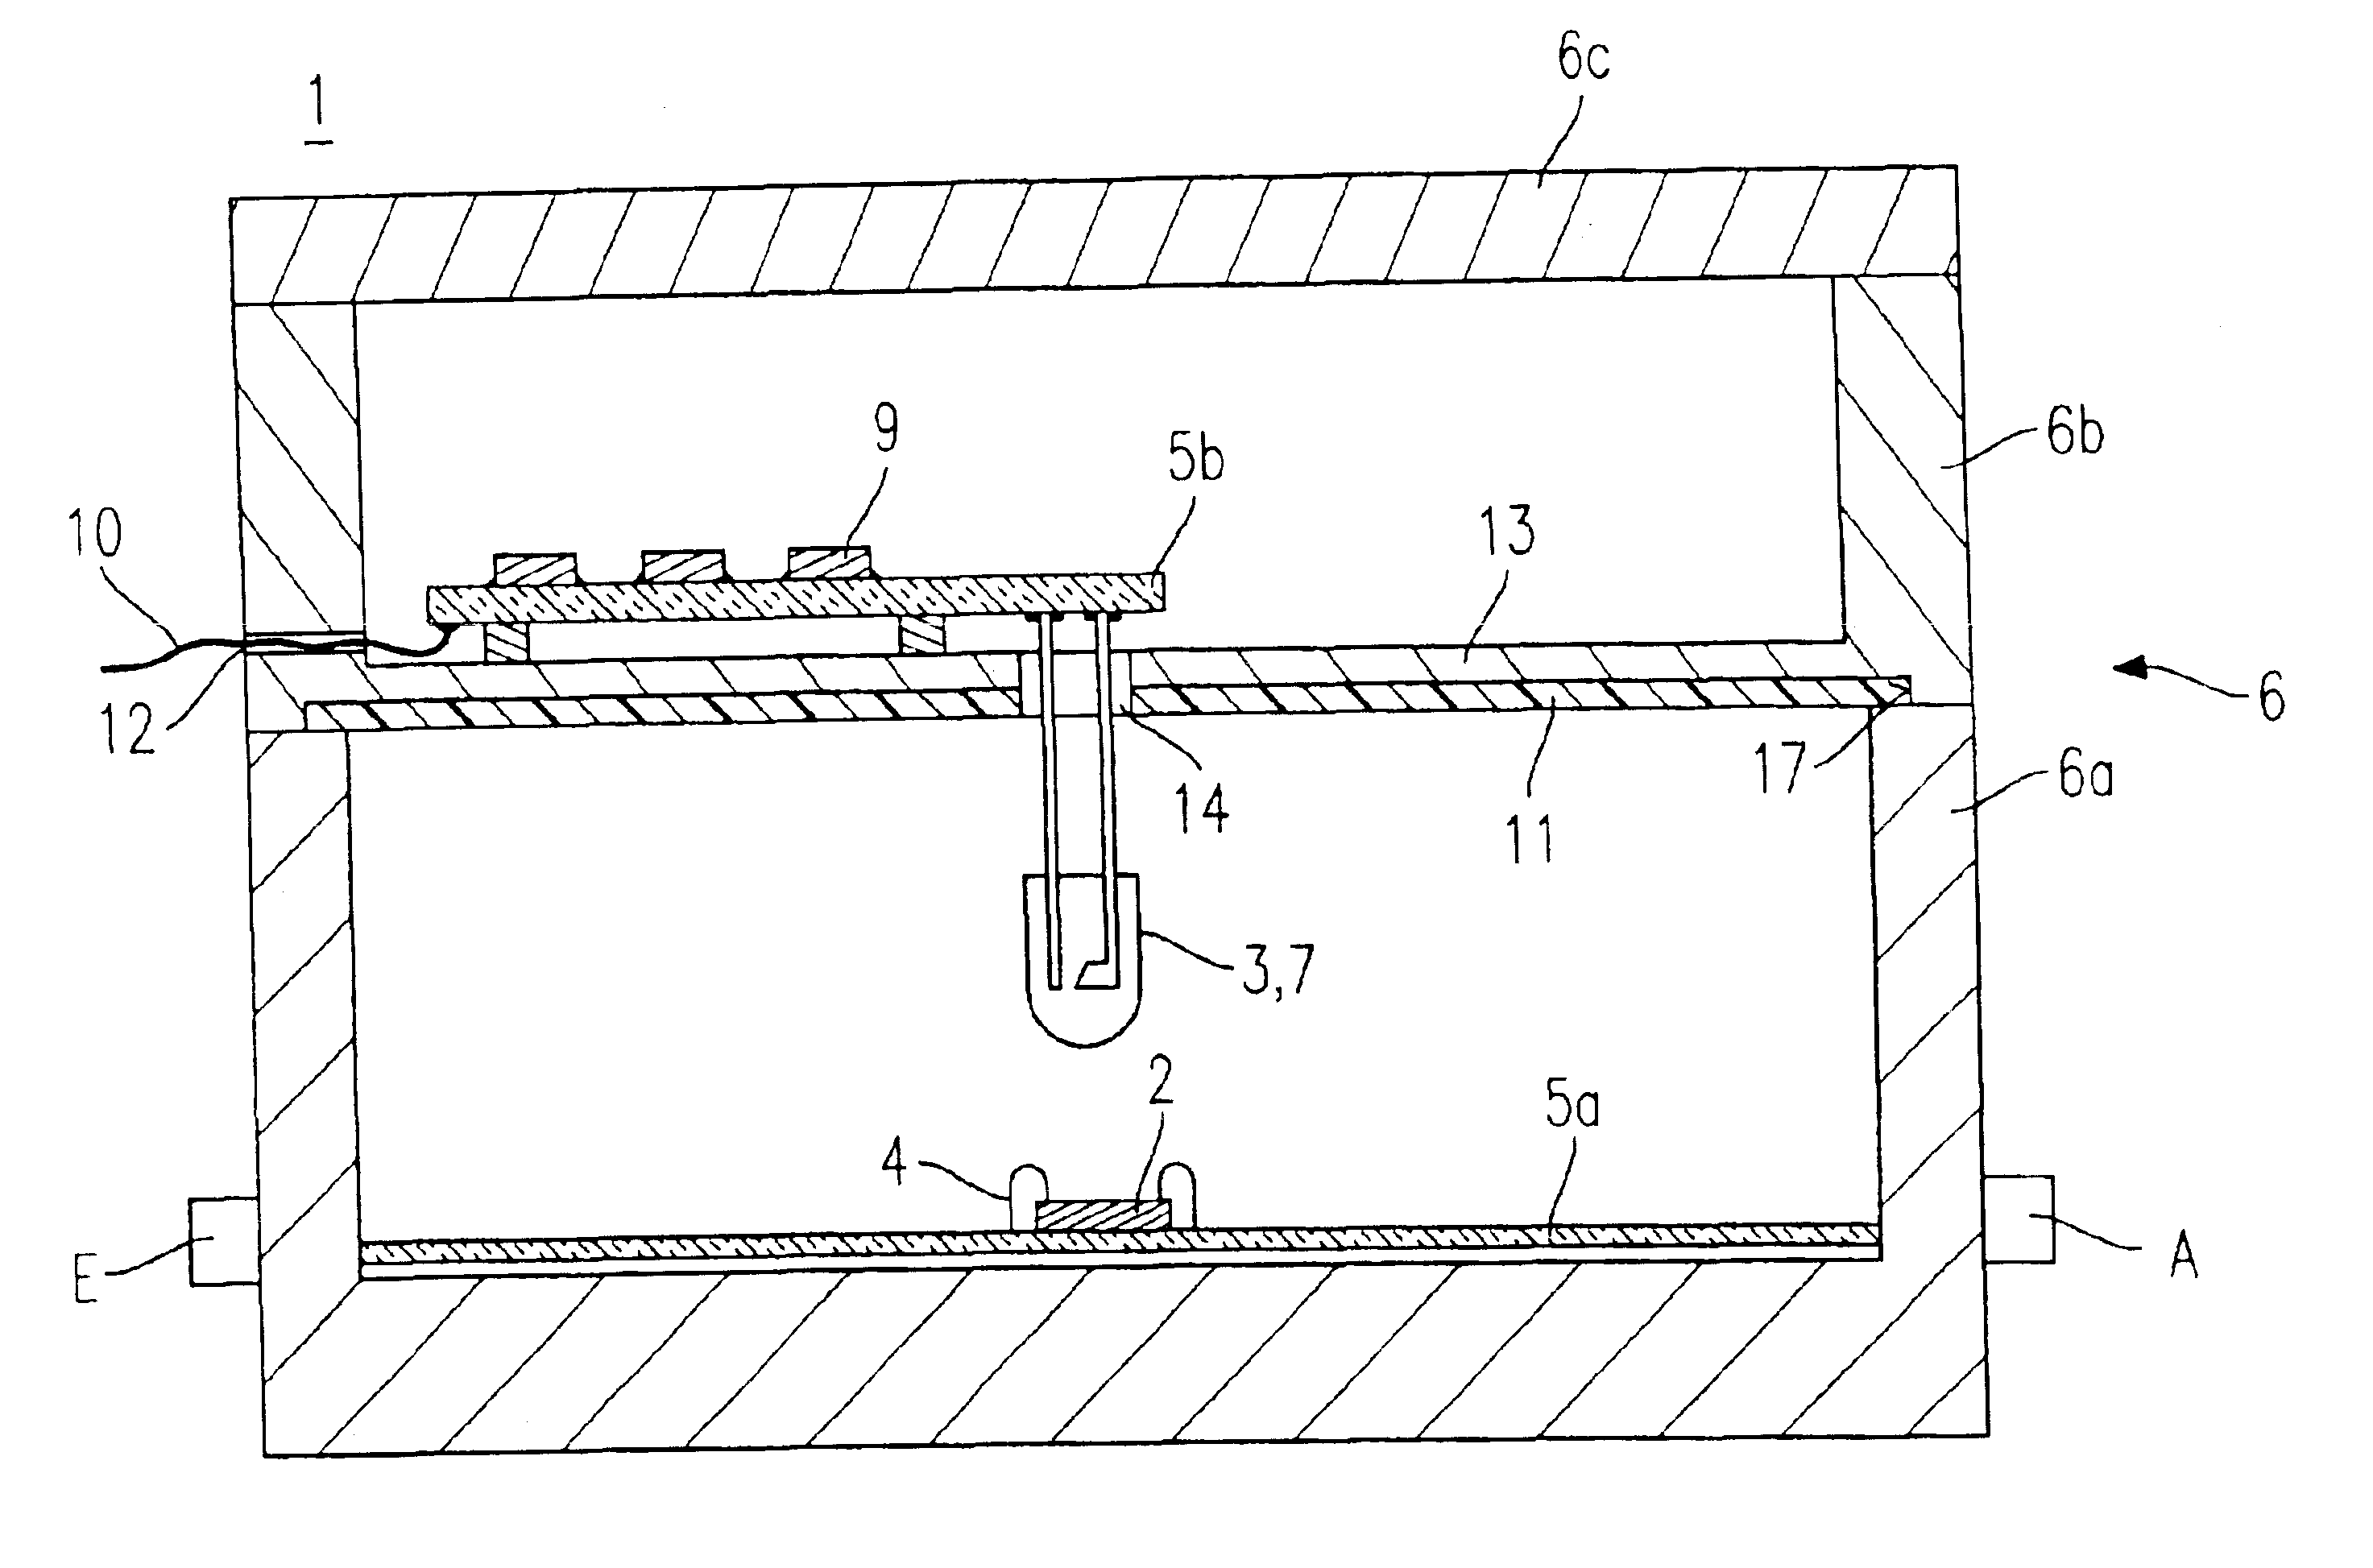 Microwave switching with illuminated field effect transistors